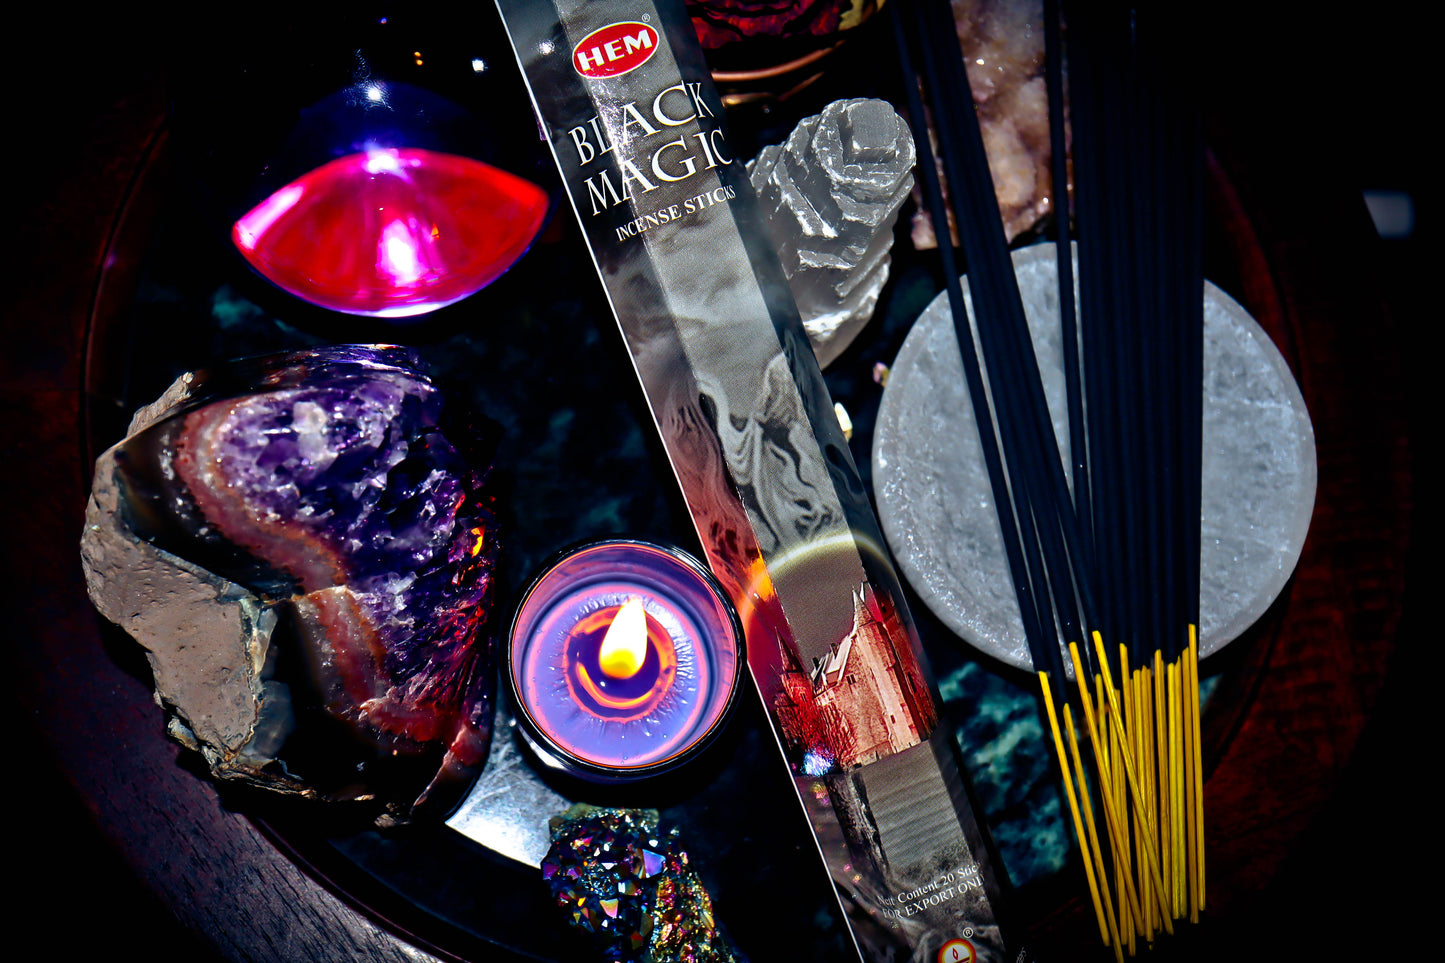 MAGICK RITUAL INCENSE BUNDLE ~ 8 Items Plus FREE GIFT! BOOST MAGICK & WISHES! Spirit Offering & More! **POWERFUL**